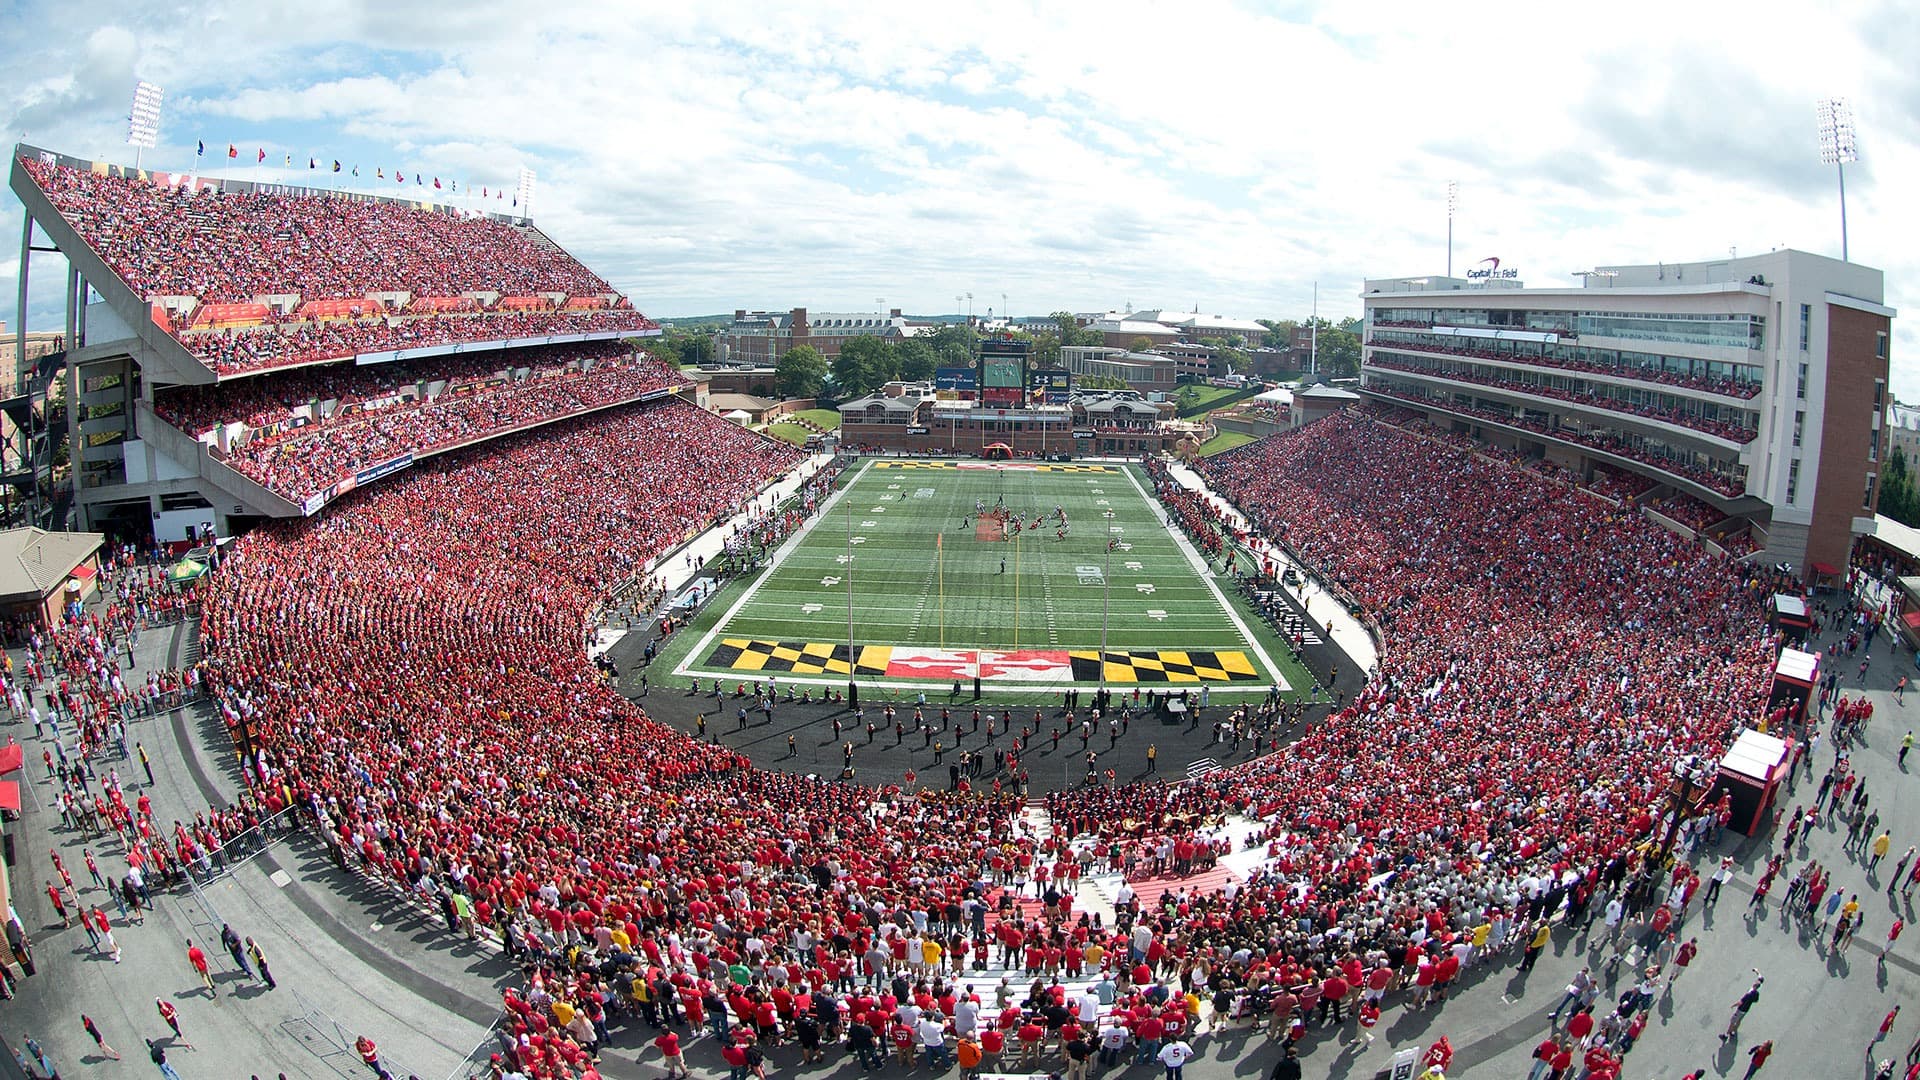 Bird's-eye view of Maryland Stadium packed with fans for a football game